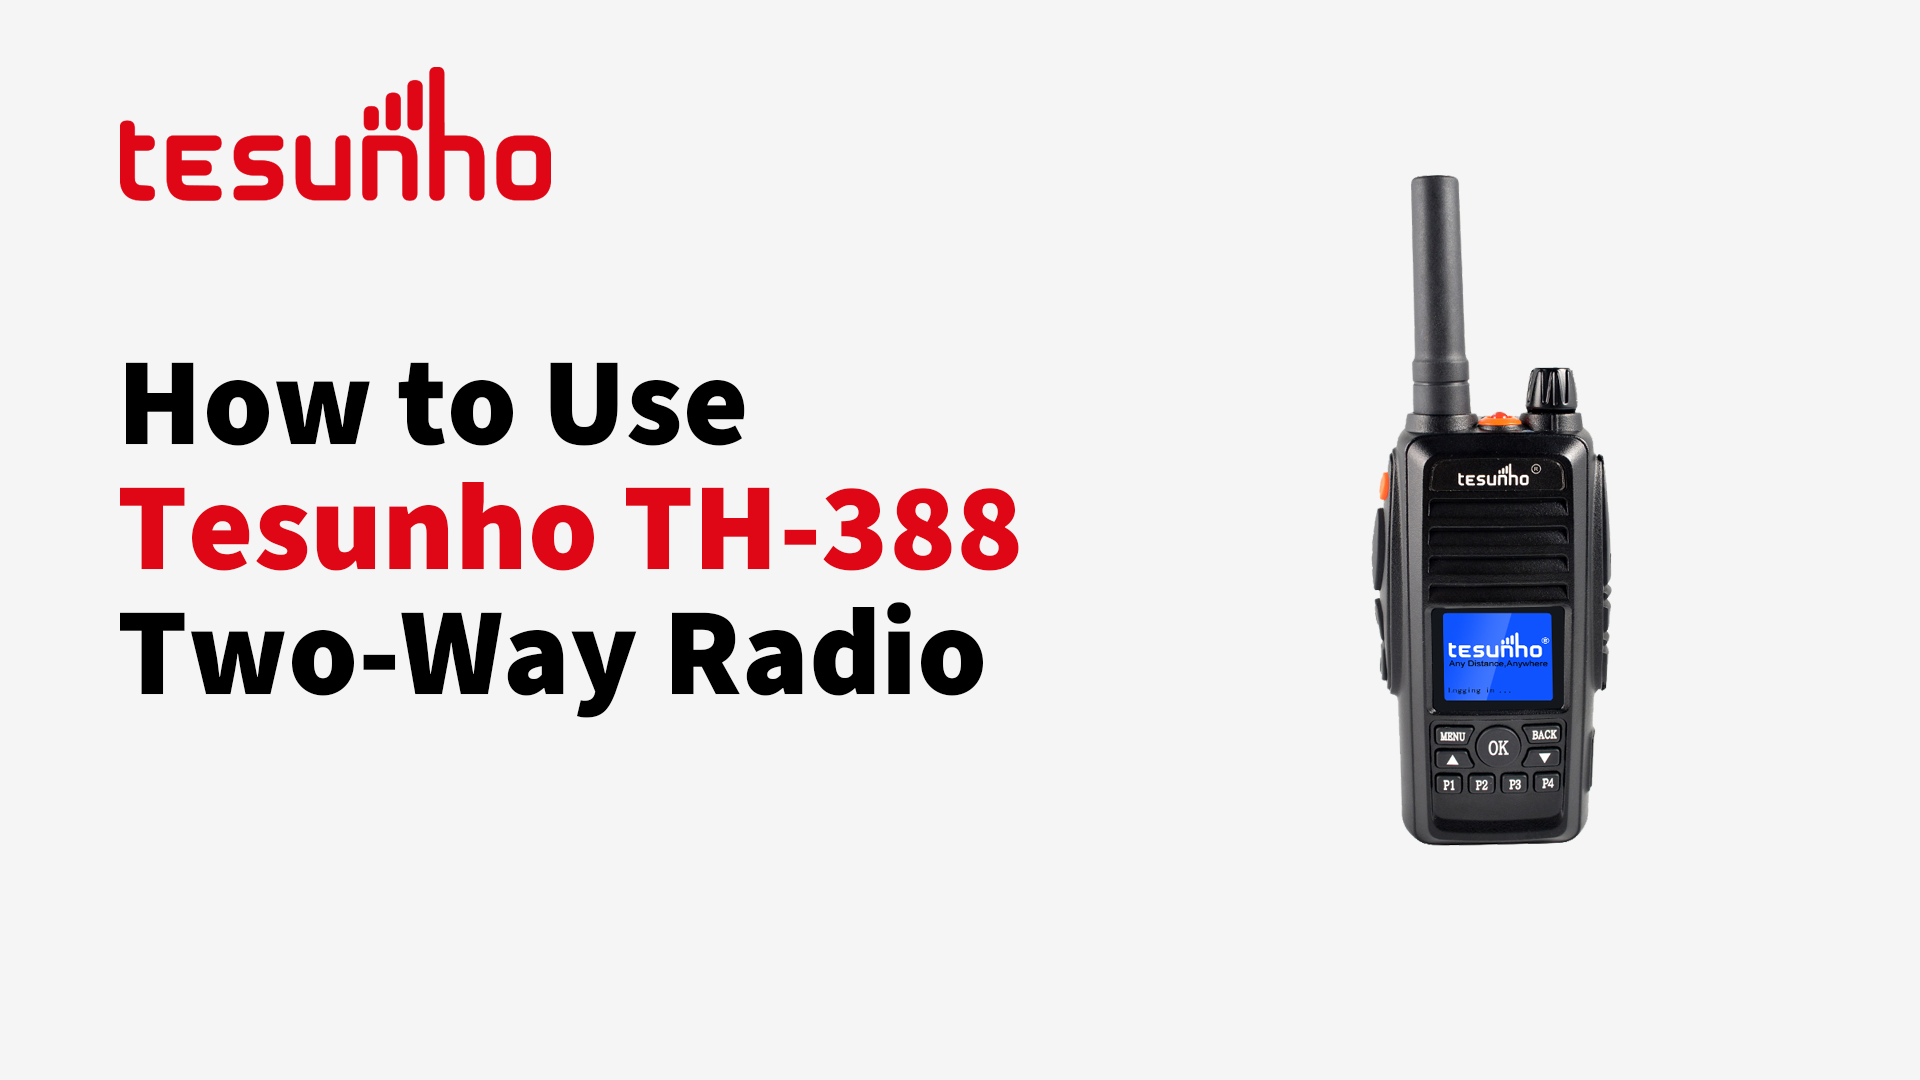 How to Use TH-388 Two-Way Radio